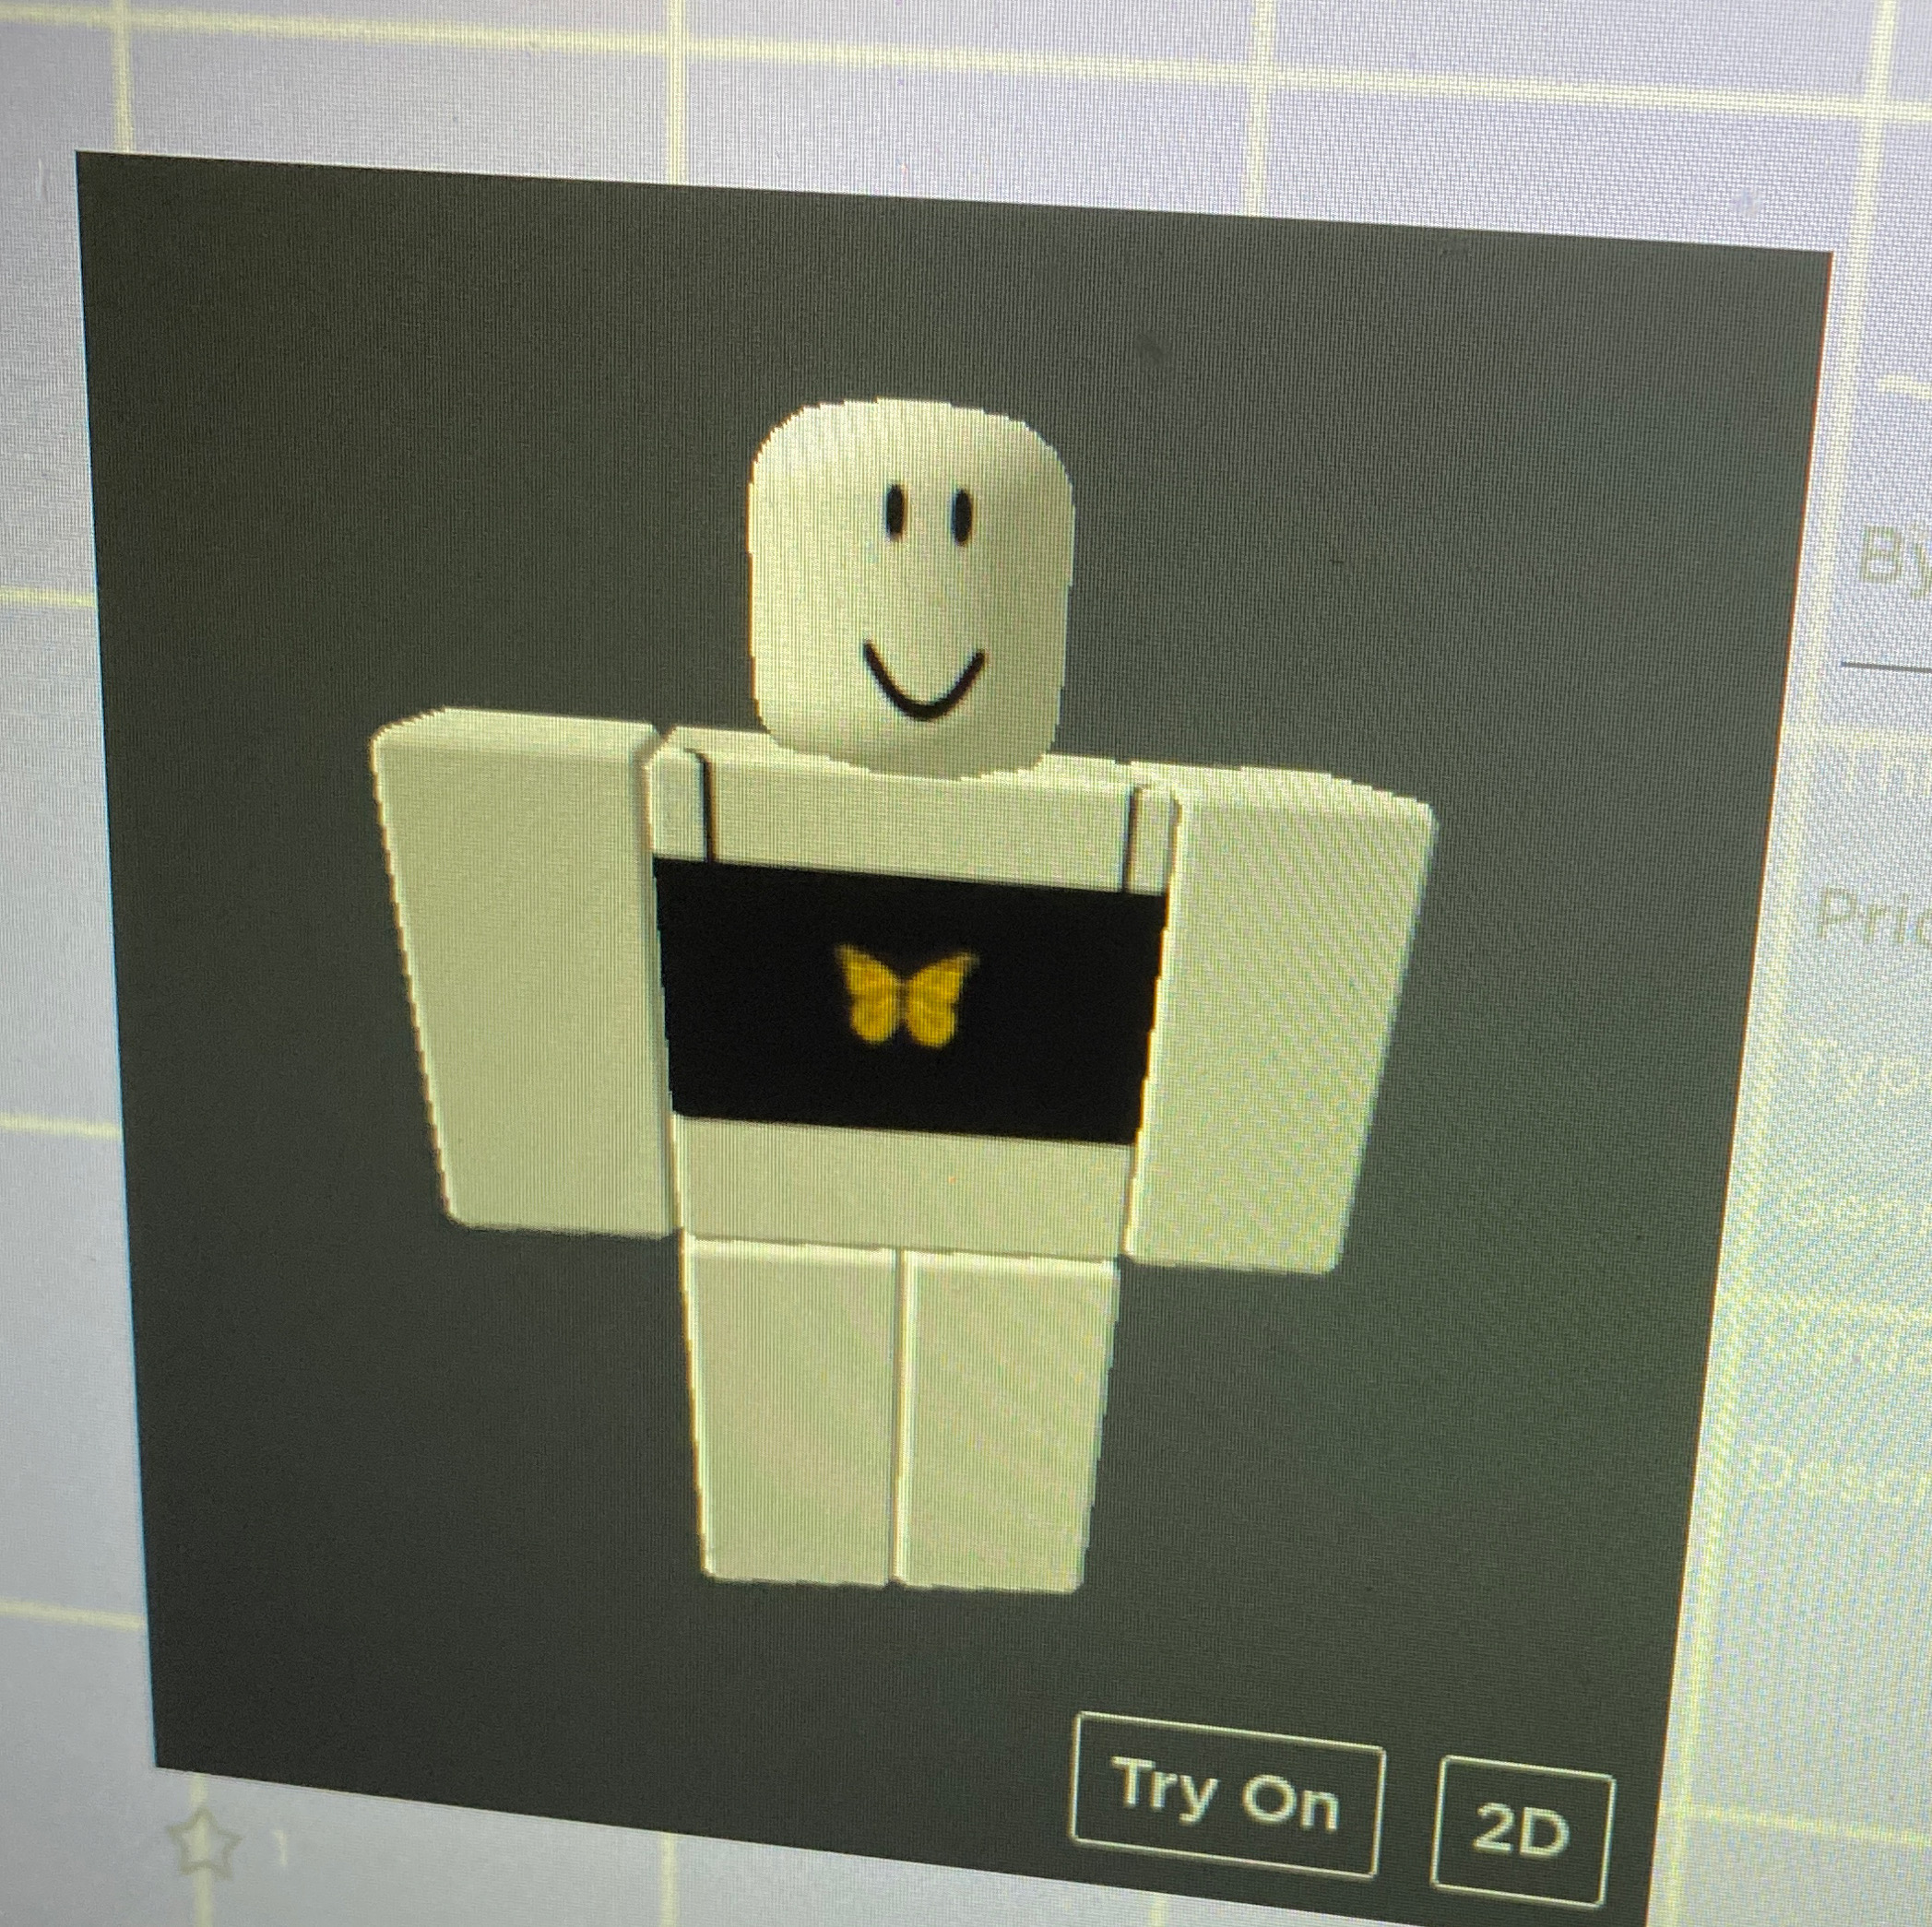 Shirt Robux Roblox First First Shirt Is Image By - get a banner advertisement for 5 robux roblox